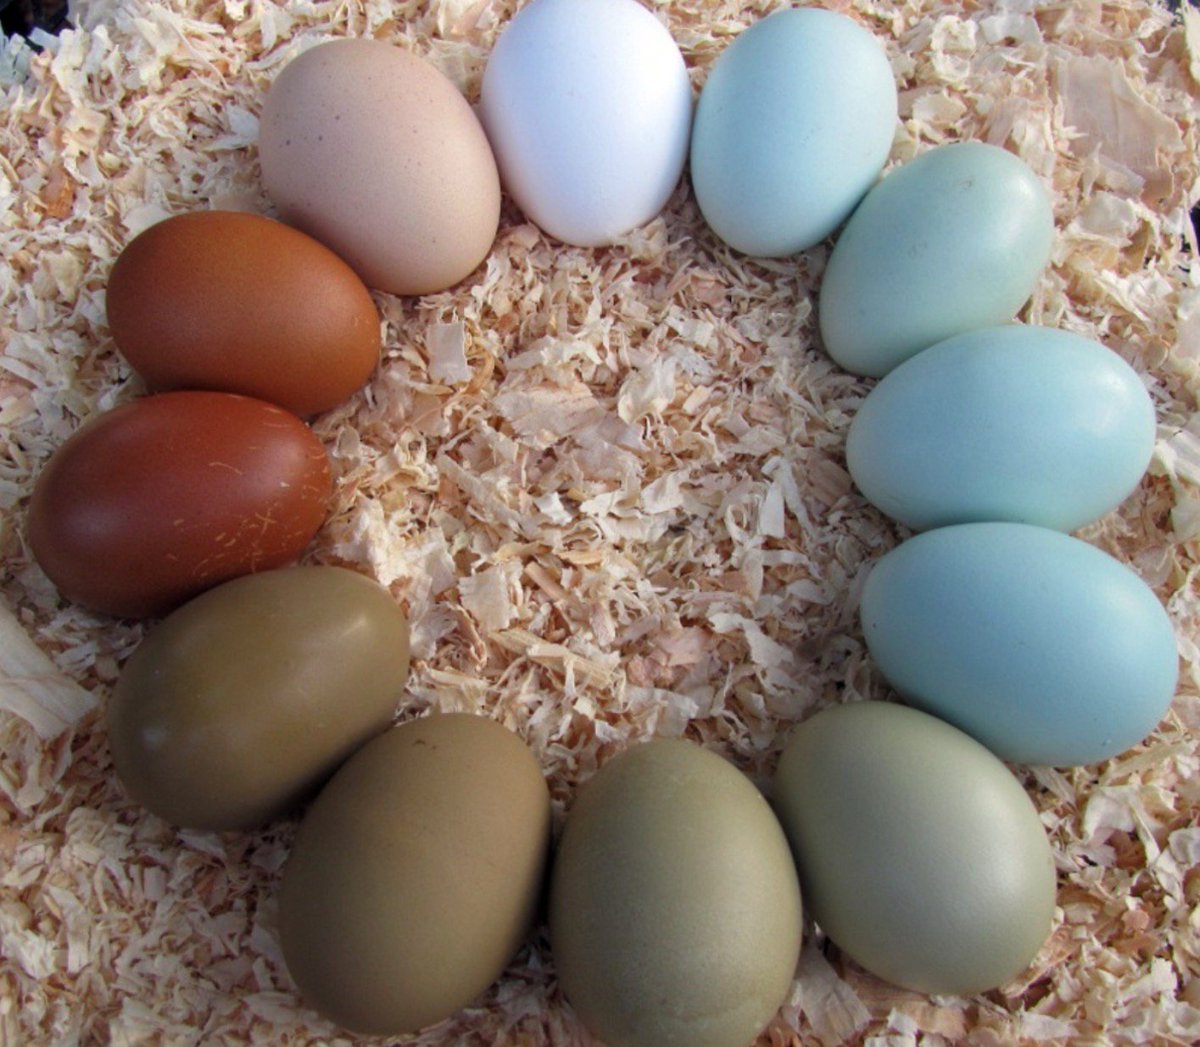 bank Fokken Milieuactivist Historic Wagner Farm on Twitter: "The Araucana Chicken is also called the  Easter Egg Chicken because it lays blue, green and pink eggs  #farmfactsfriday https://t.co/OaZoJuJ2e3" / Twitter